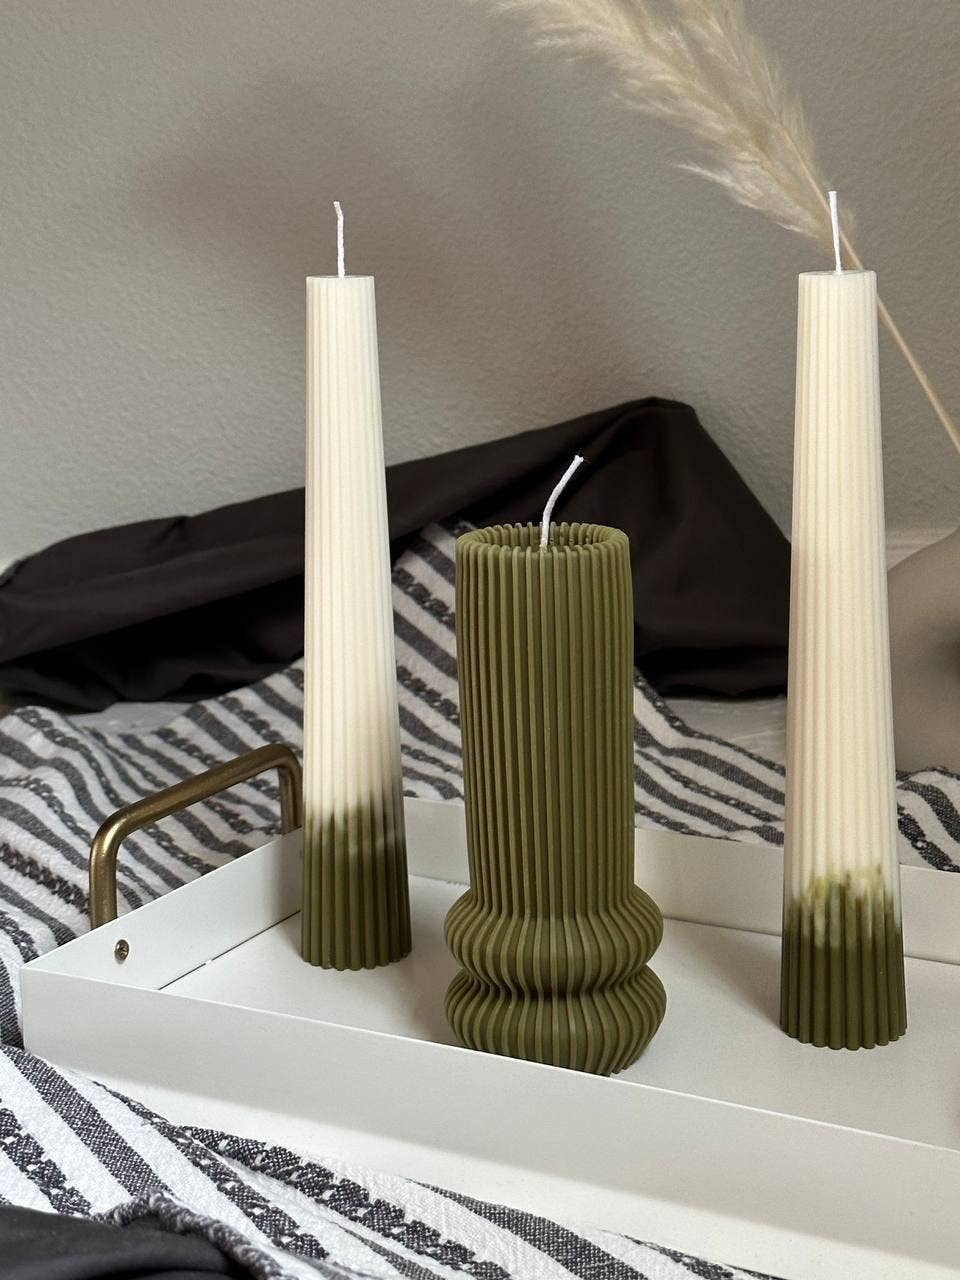 Check out the latest collections of Urban Crafter Candle Making